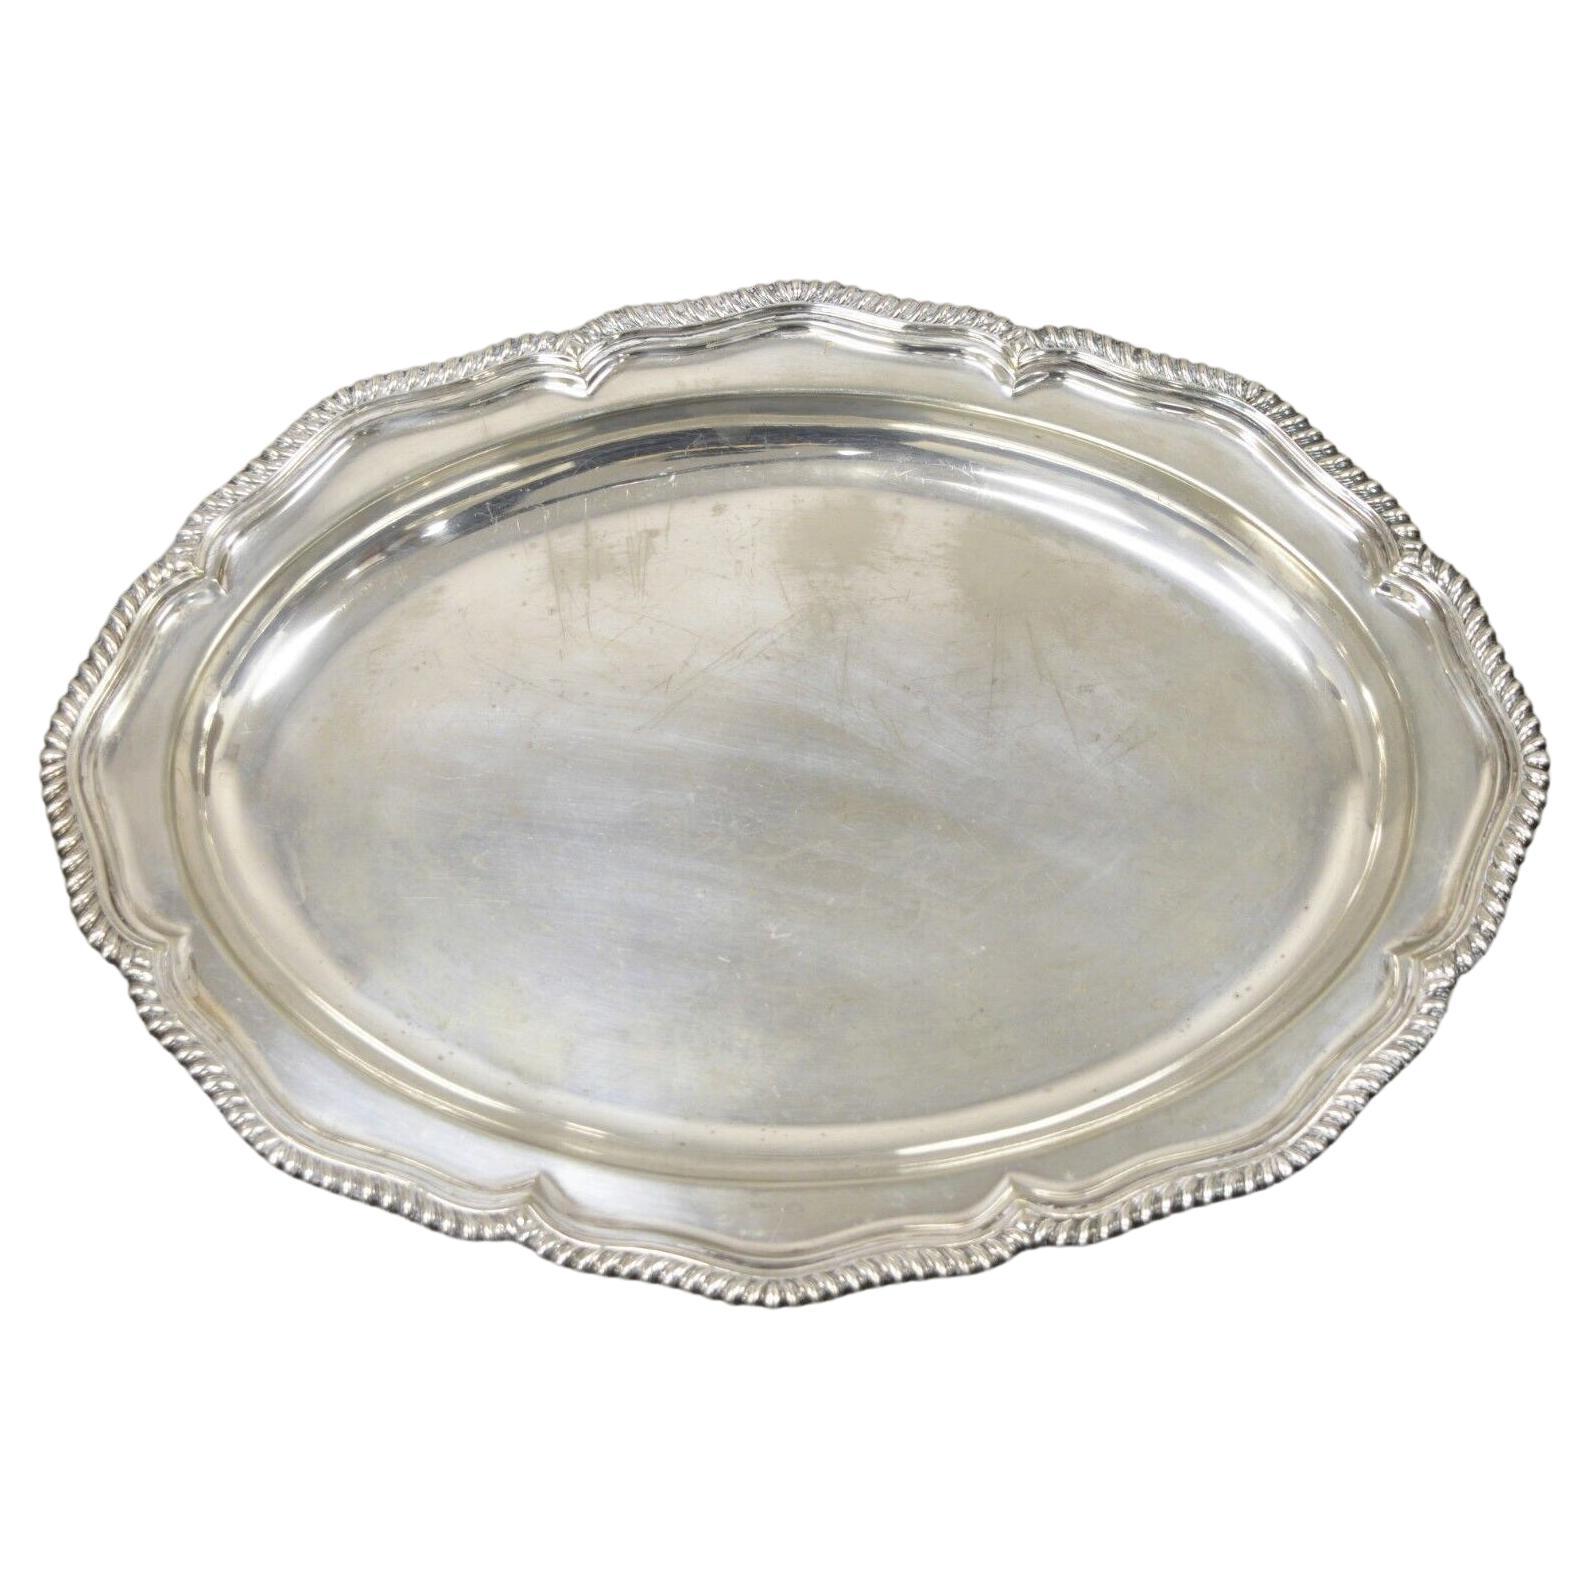 Tiffany & Co. Makers Silver Soldered Oval Vegetable Serving Dish Silver Plate